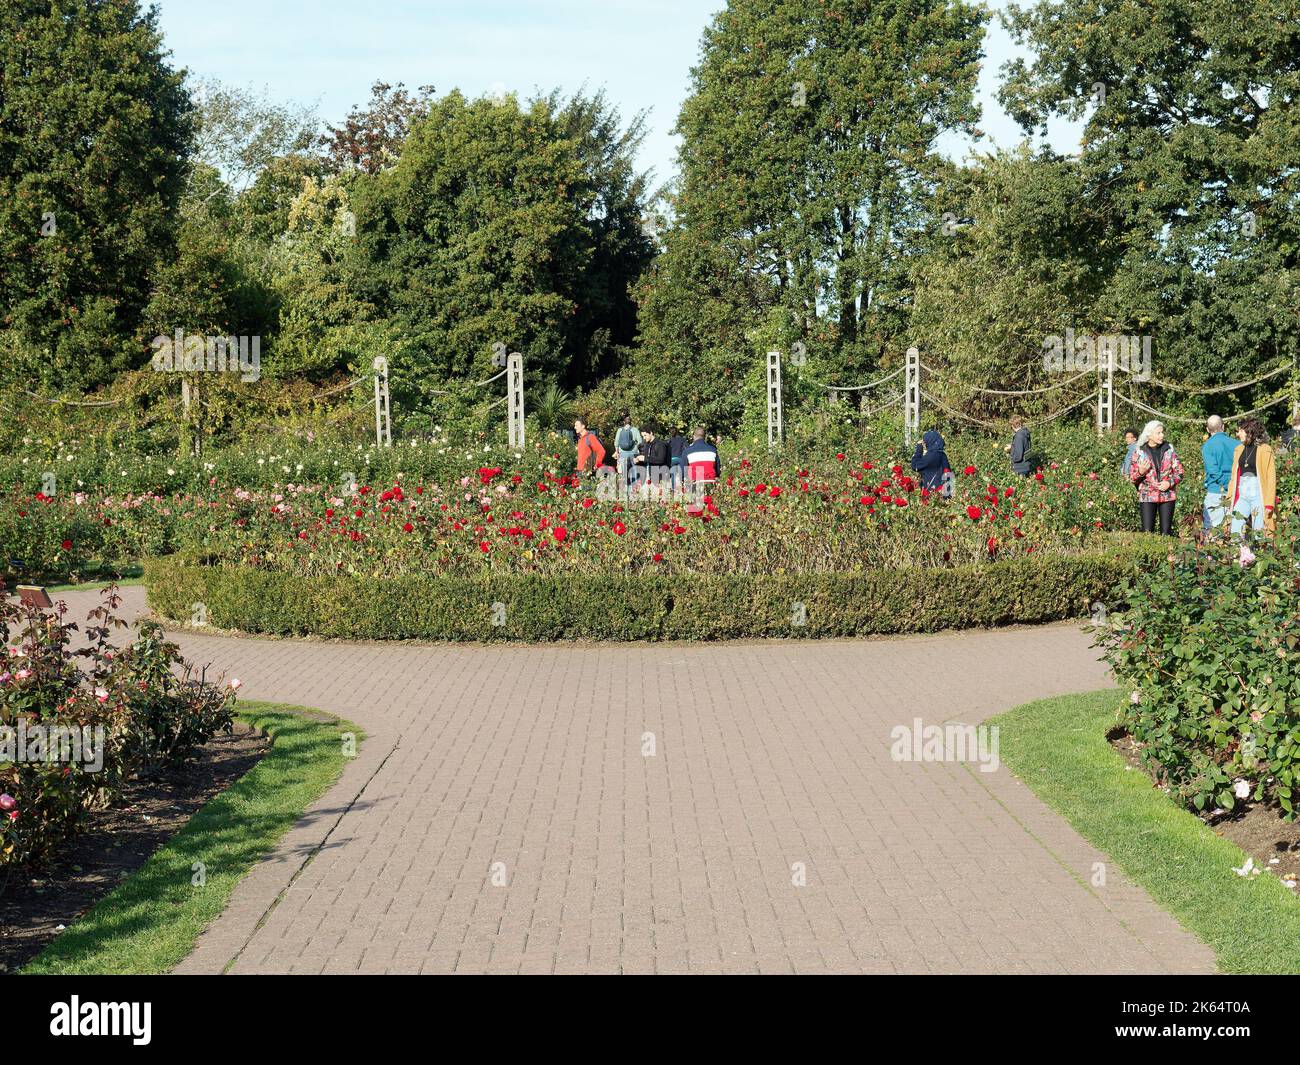 People wandering through Queen Mary's Rose Garden within the inner circle of London's Regent's Park Stock Photo